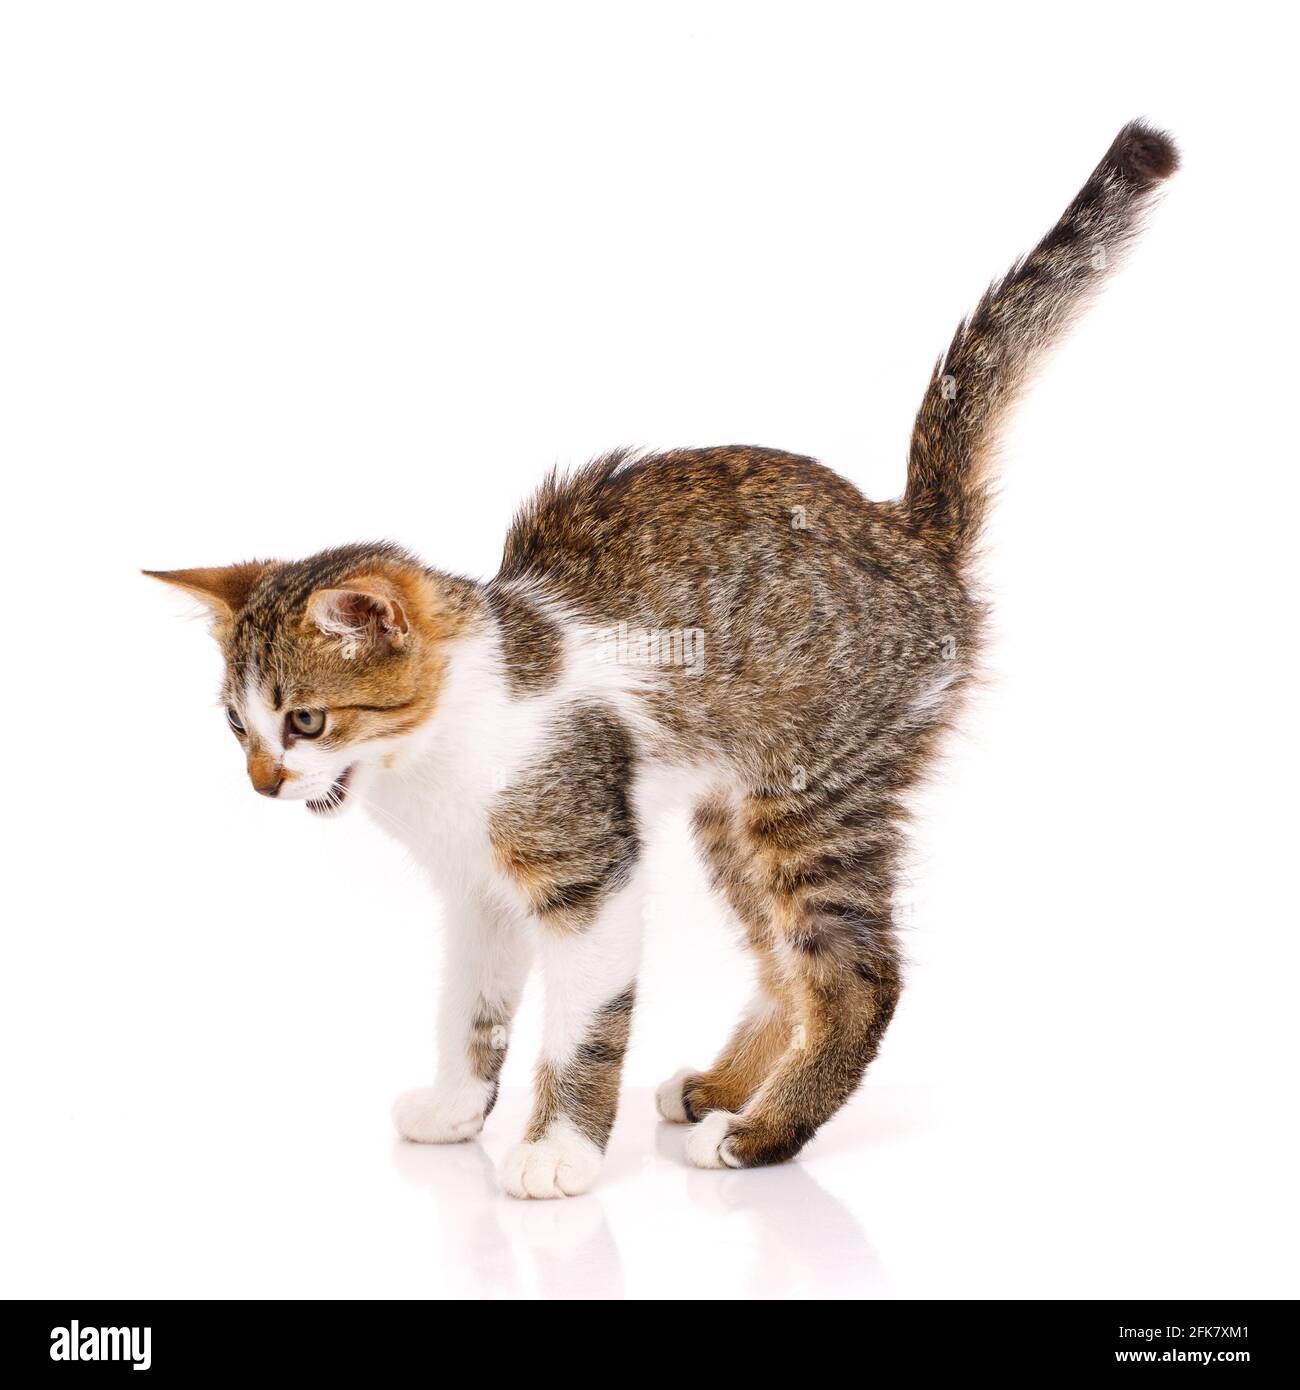 Frightened little kitten with white and brown fur stands with its tail raised and meows angrily. Isolated on a white background. Concept of pets and c Stock Photo